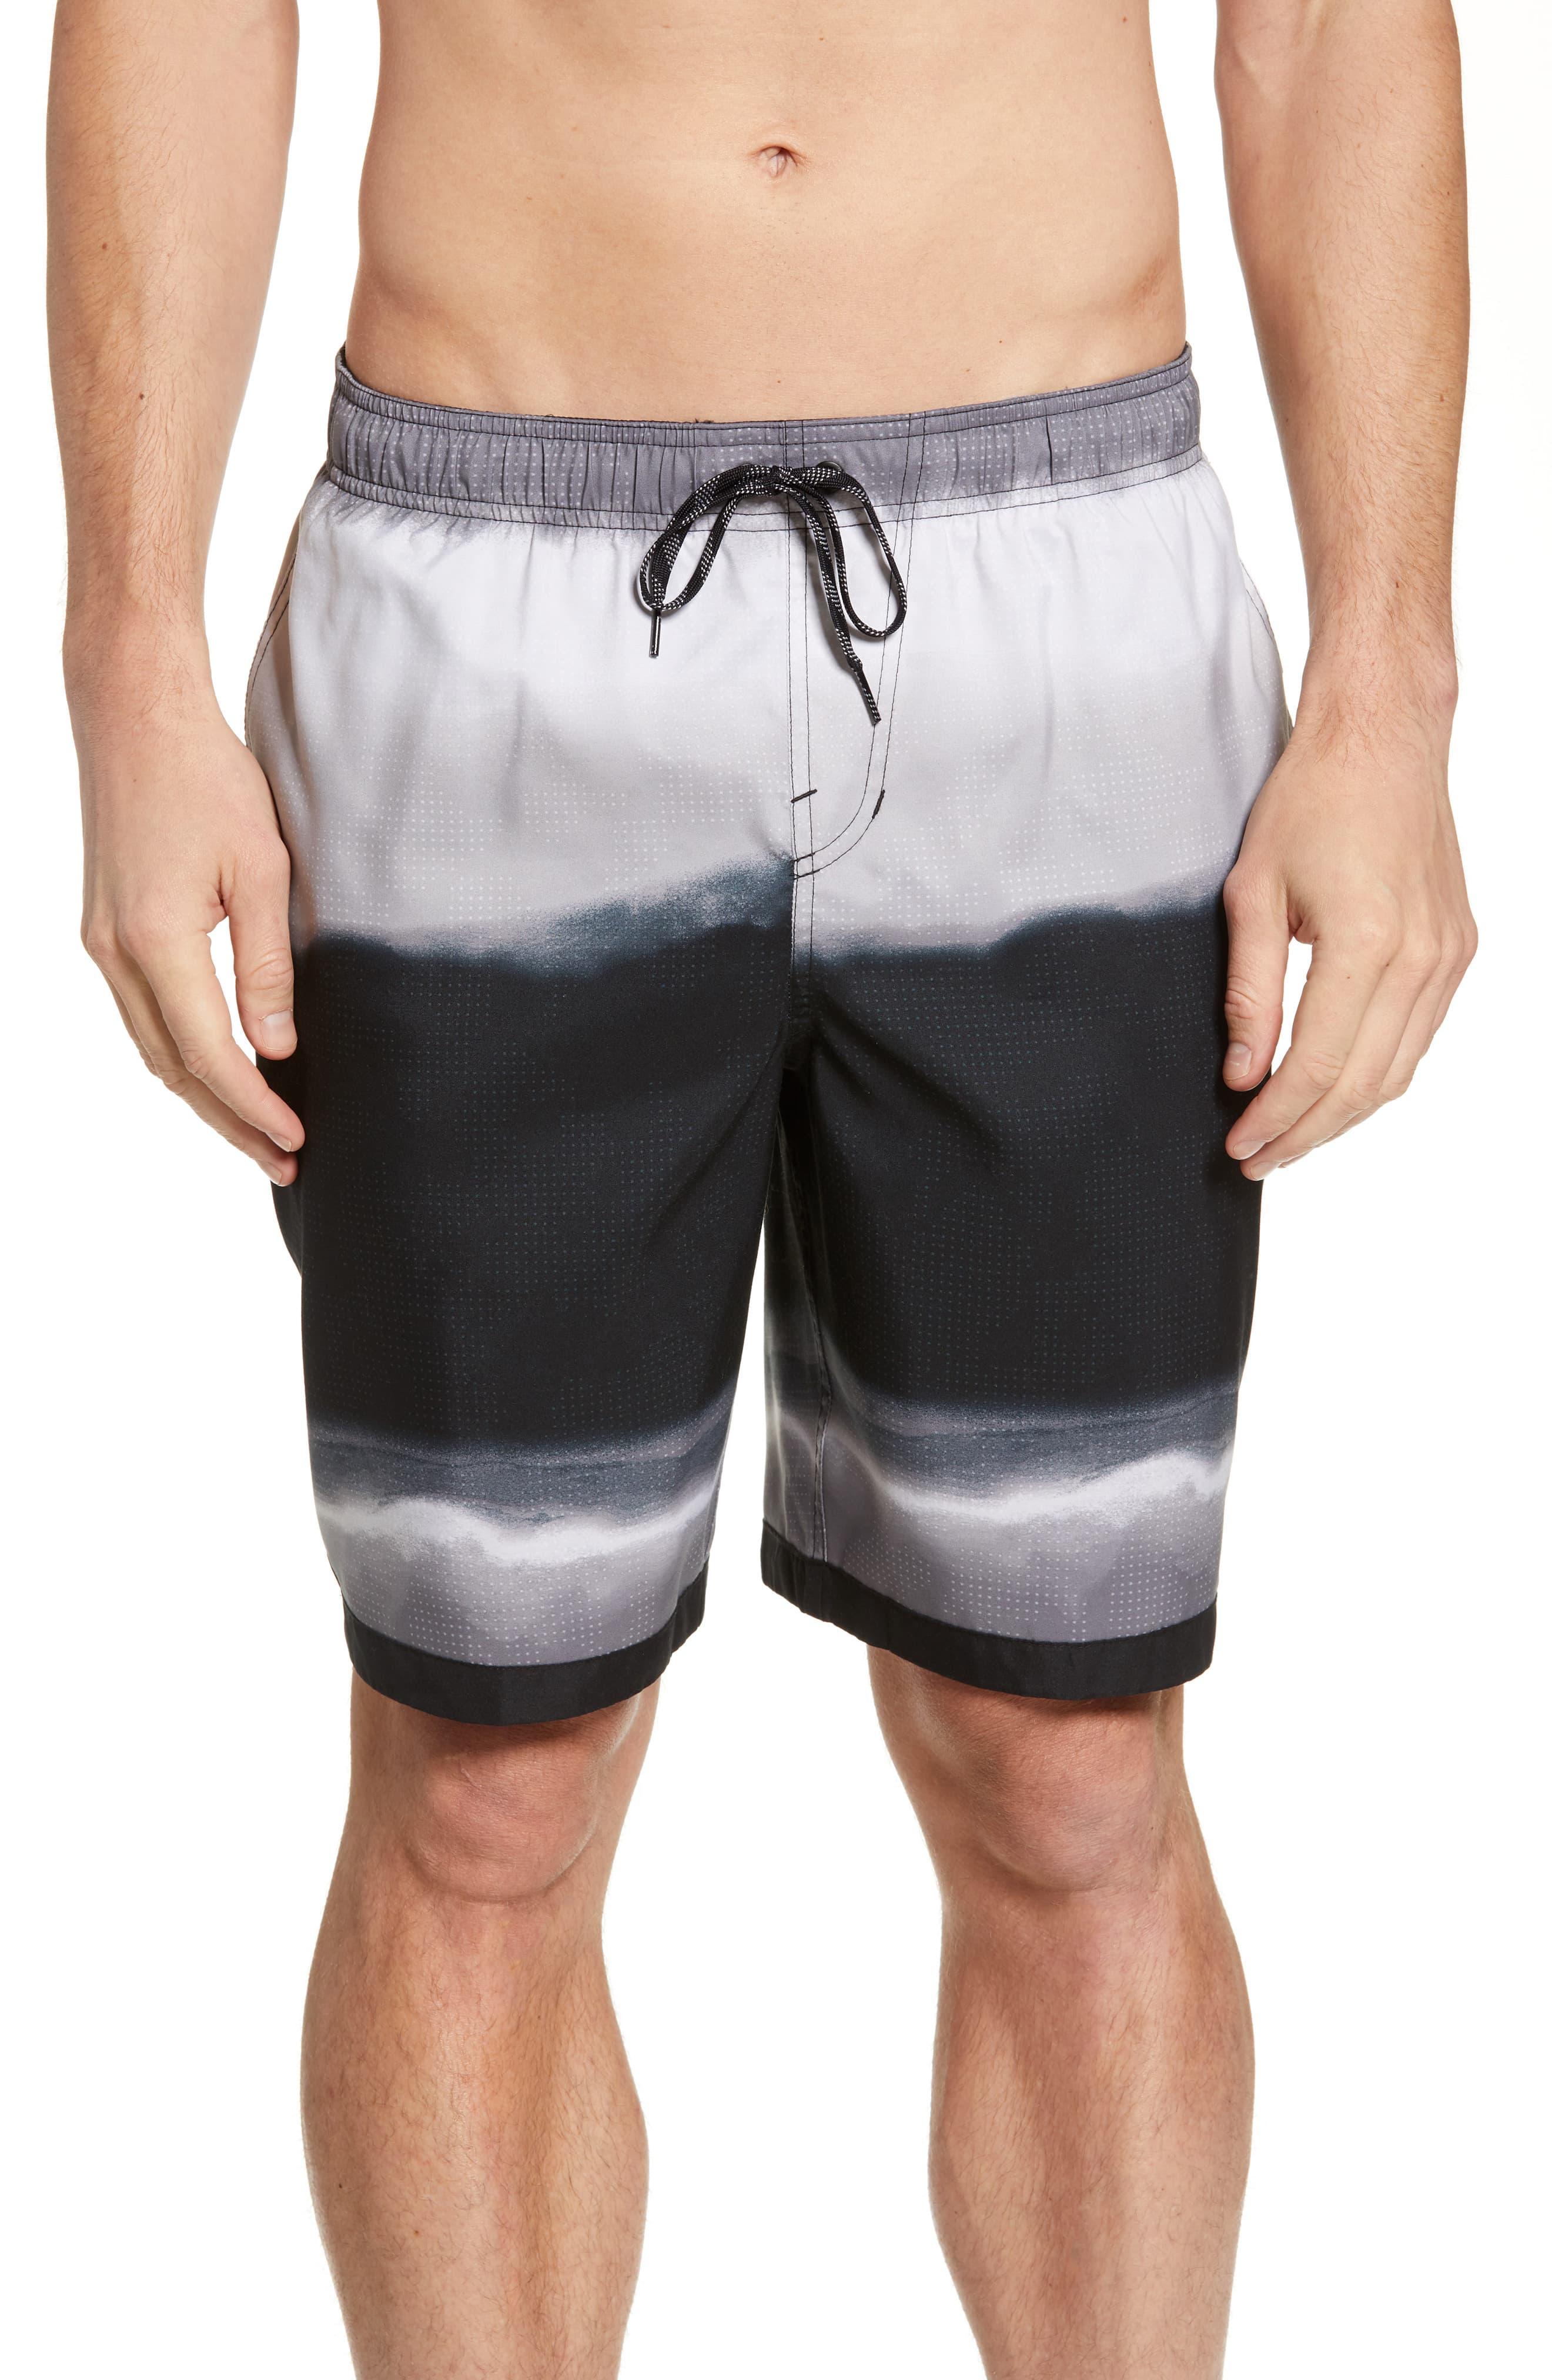 Nike Optic Halo Volley Shorts in Black for Men - Lyst